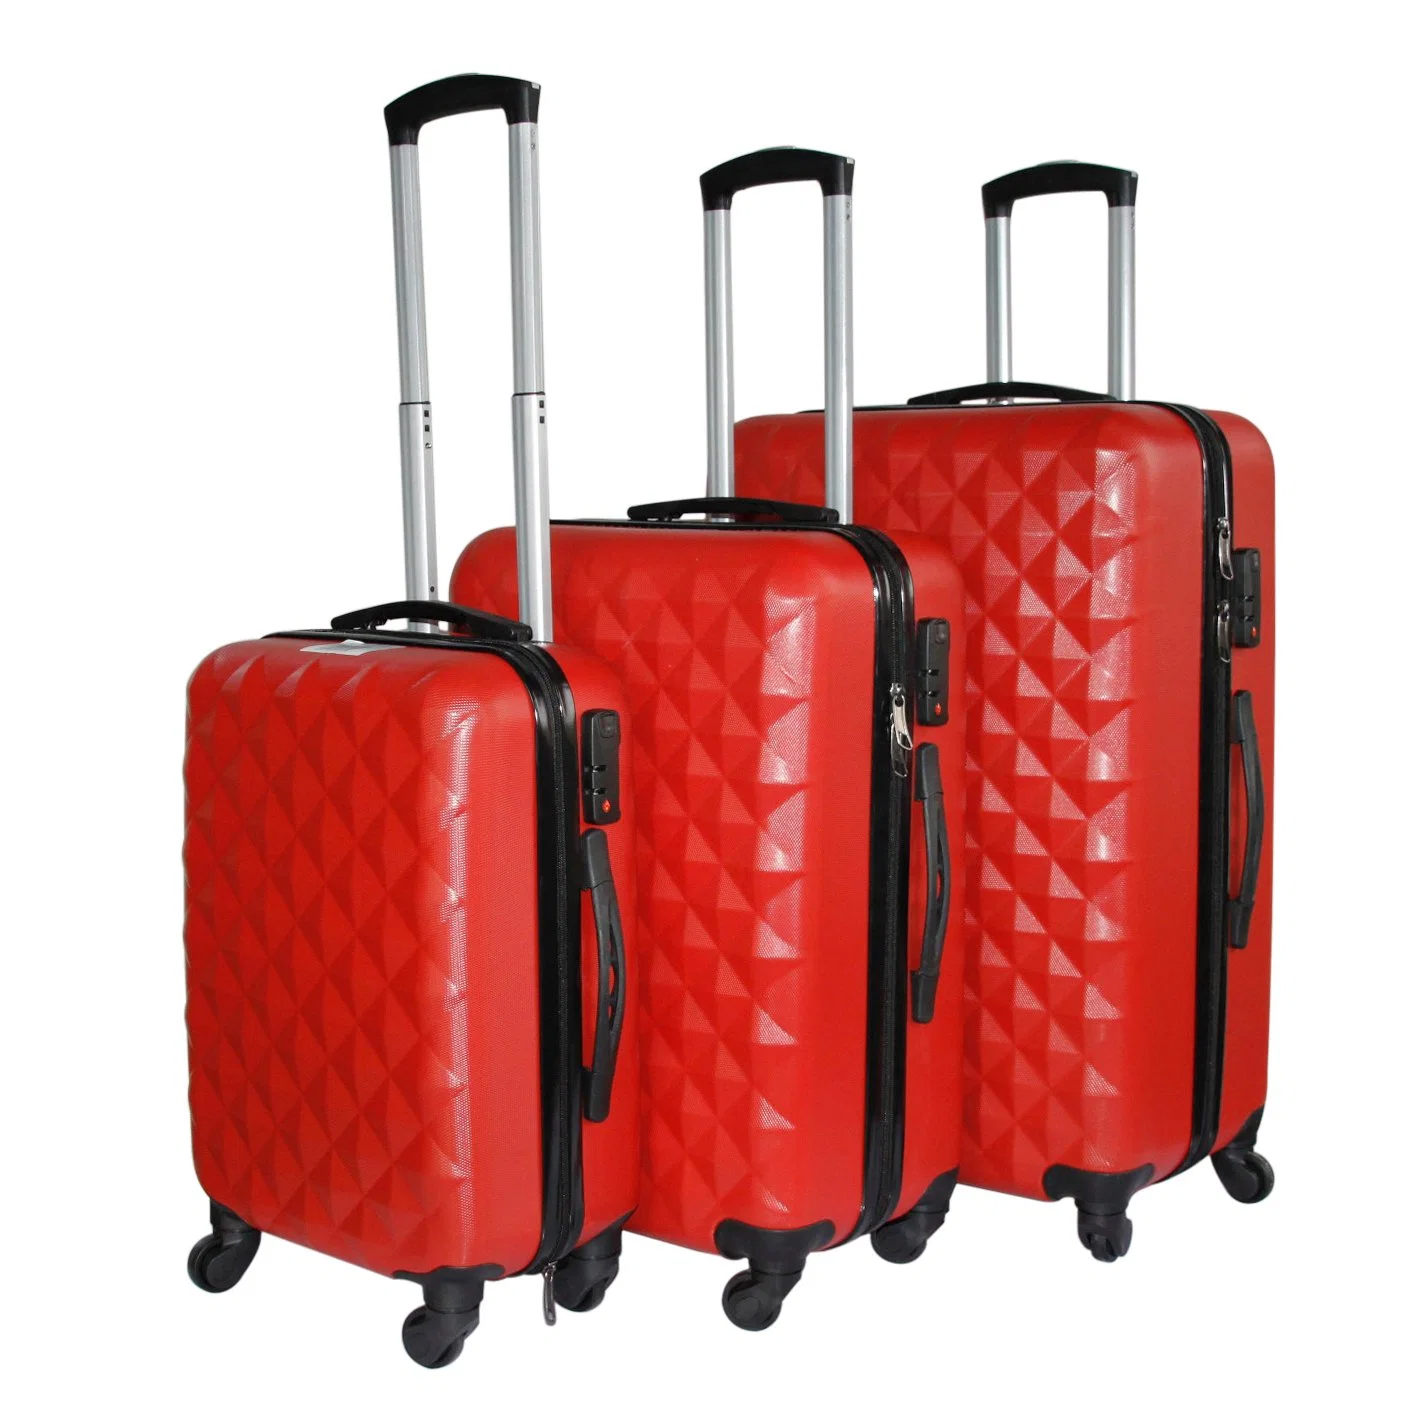 Trolley Luggage Bag Case Universal Wheel Rolling Cabin Boarding Hard Shell Travel Suitcase